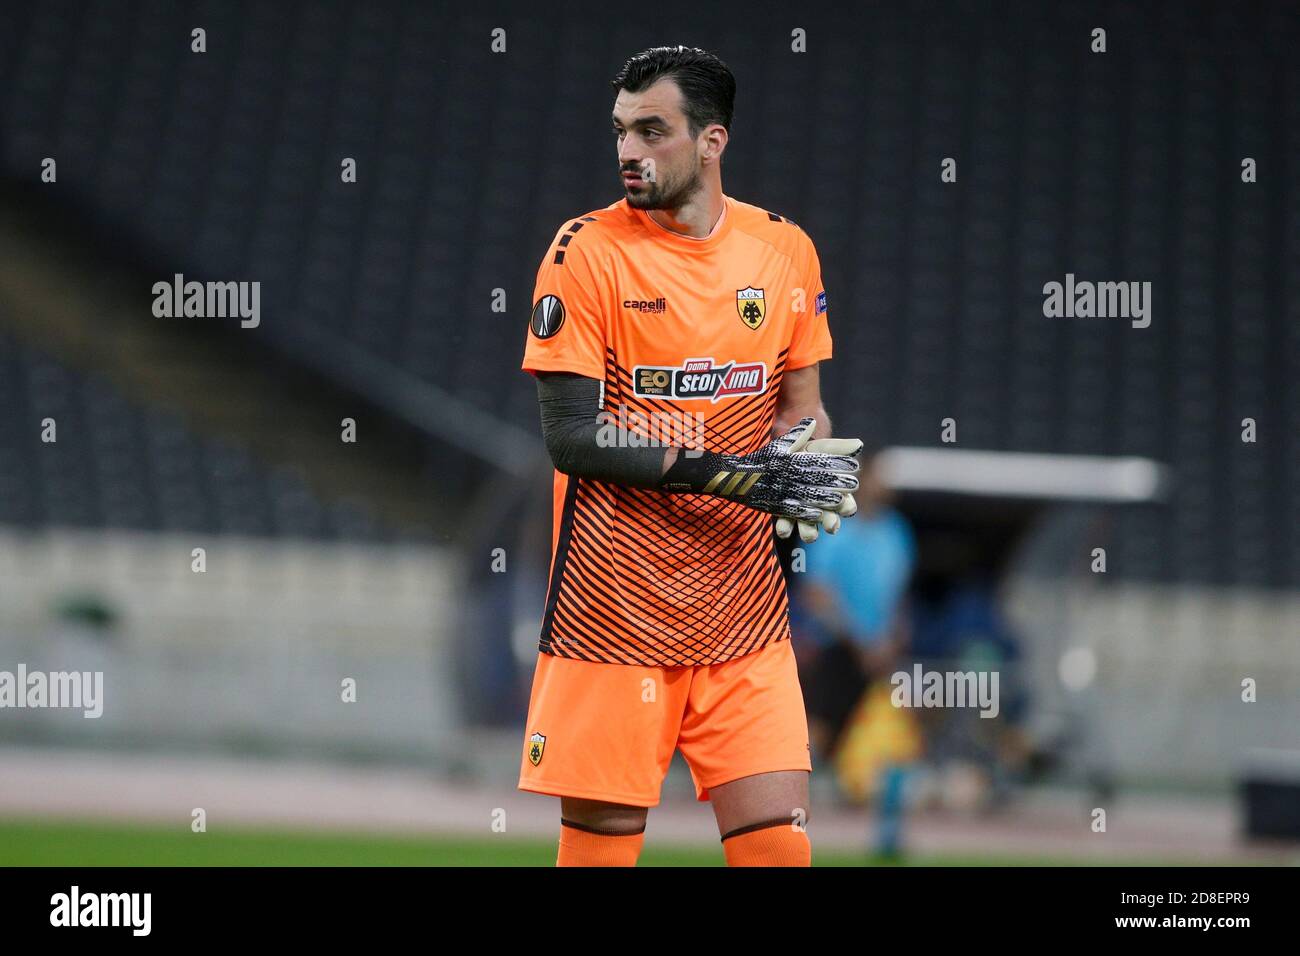 ATHENS, GREECE - OCTOBER 29: Panagiotis Tsintotas of AEK Athens during the UEFA Europa League Group G stage match between AEK Athens and Leicester City at Athens Olympic Stadium on October 29, 2020 in Athens, Greece. (Photo by MB Media) Stock Photo